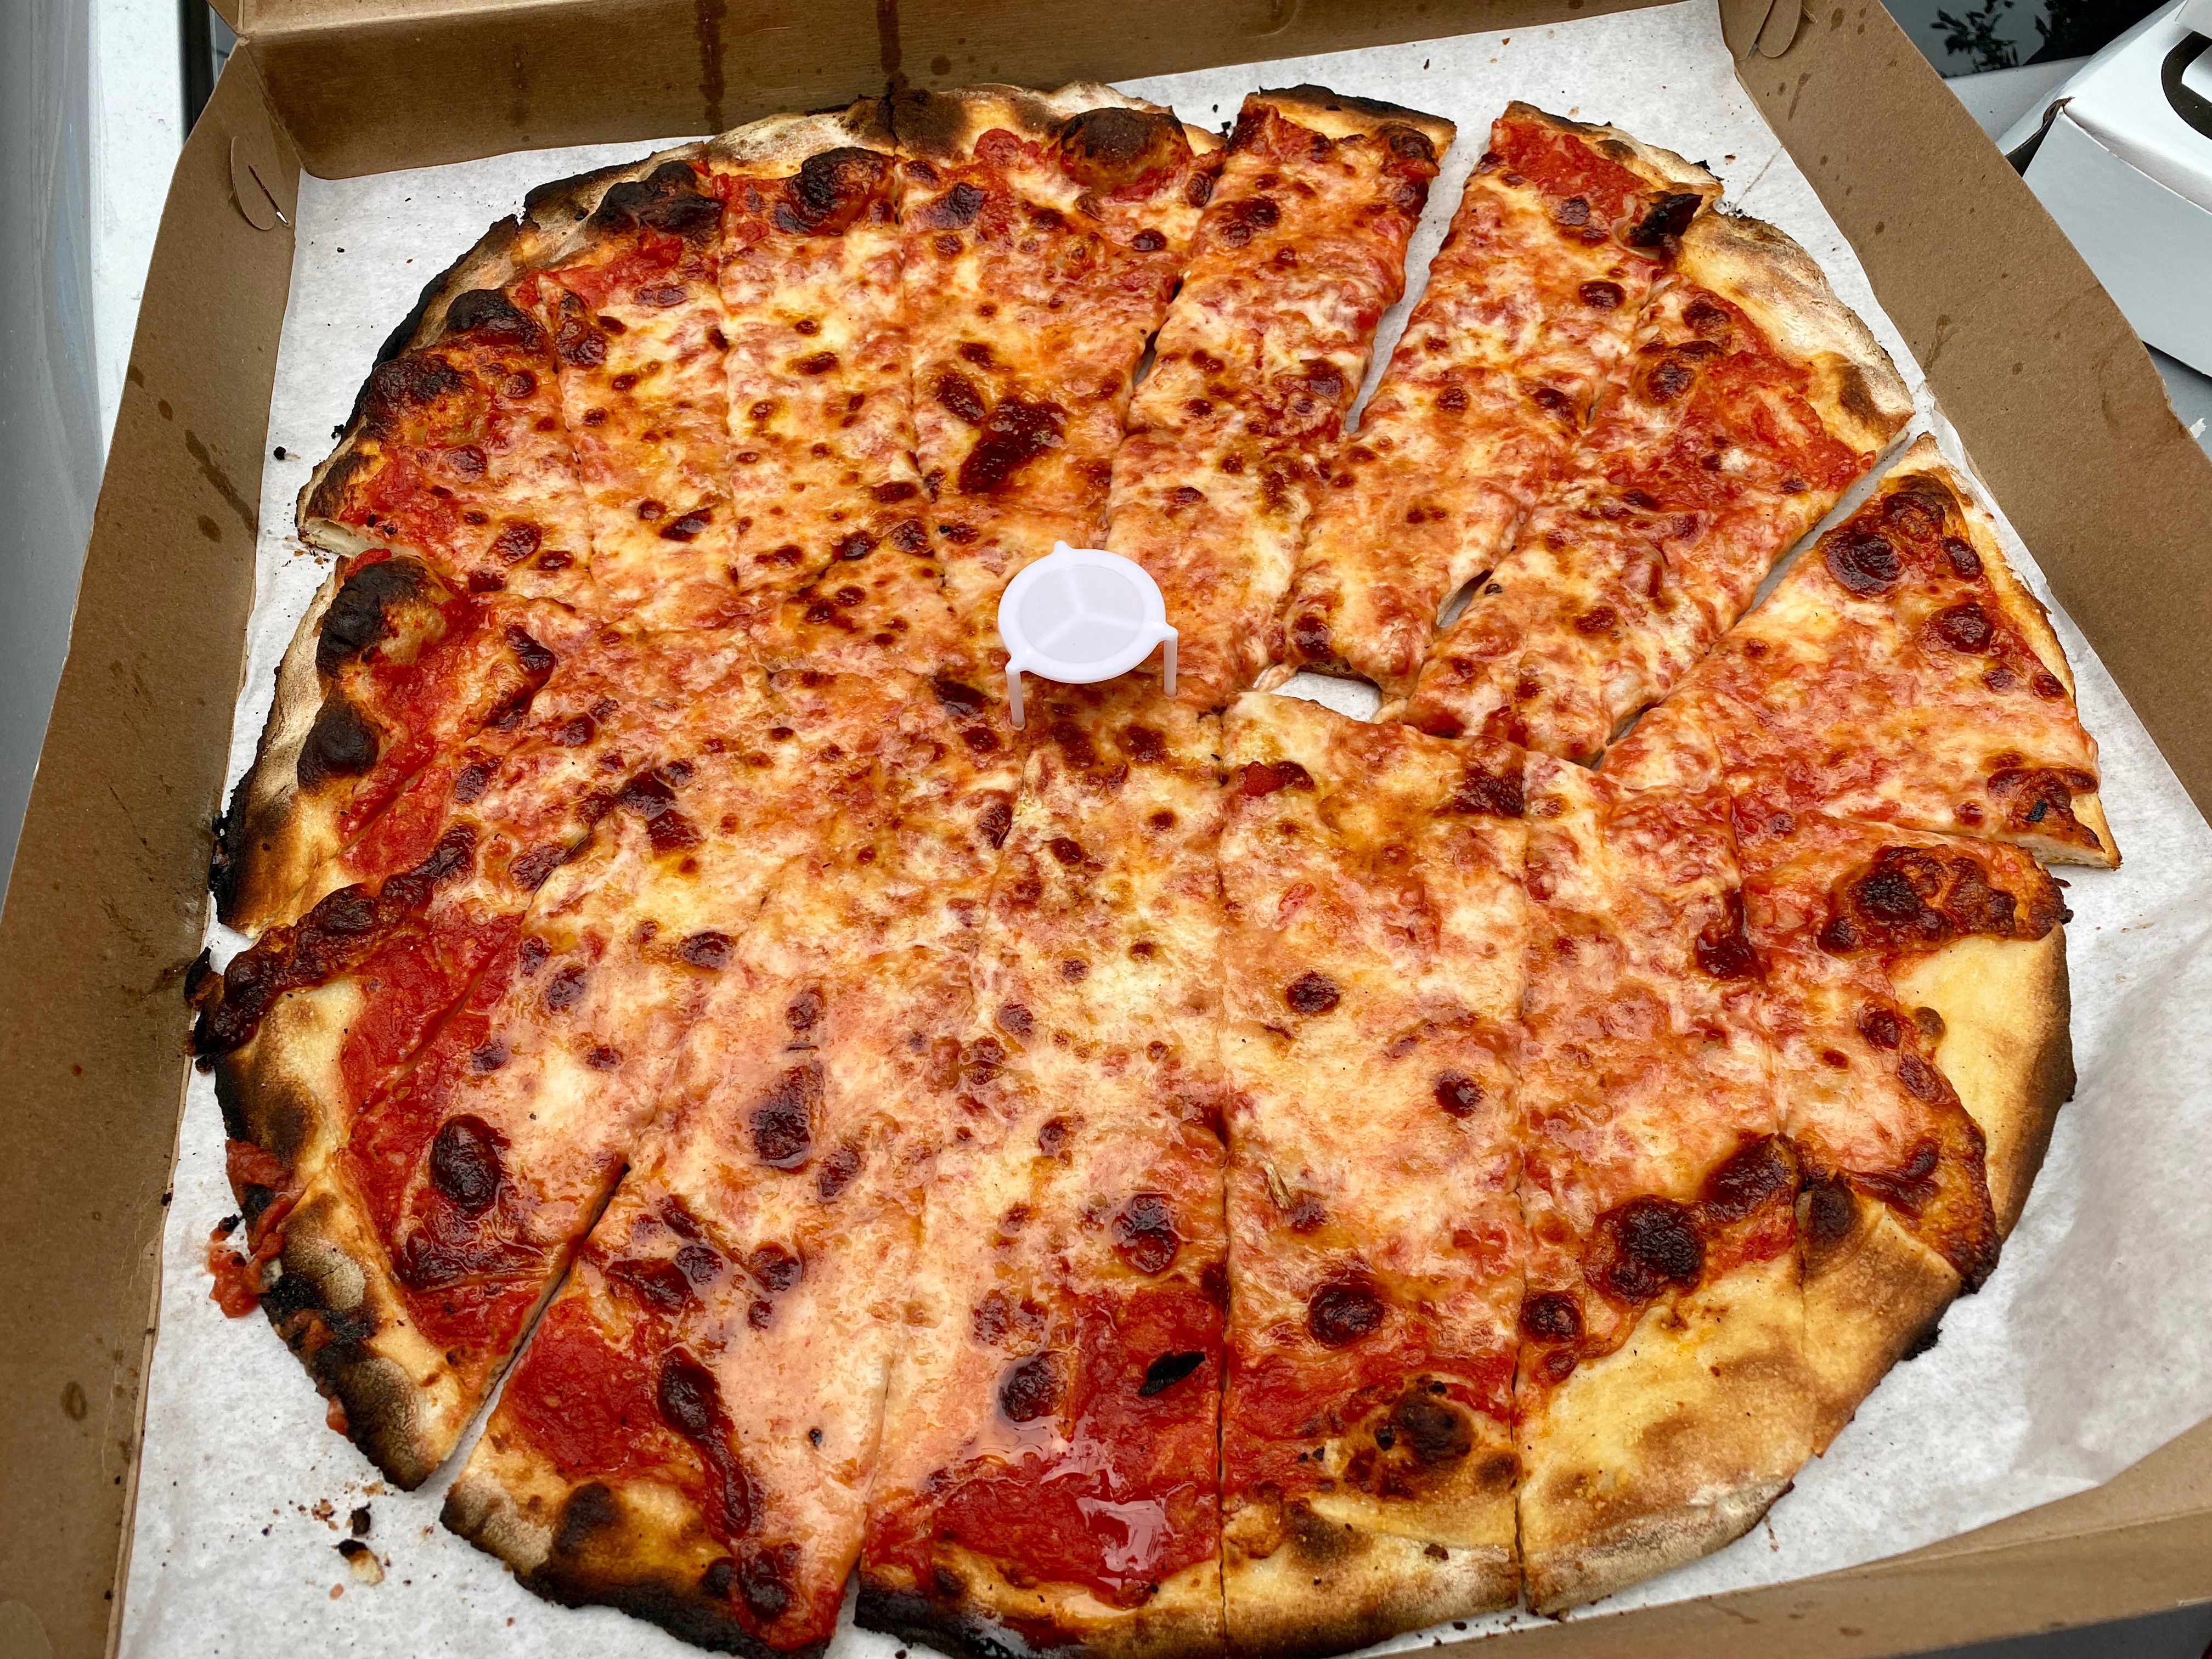 I drove 4 hours to prove N.J. has better pizza than Connecticut